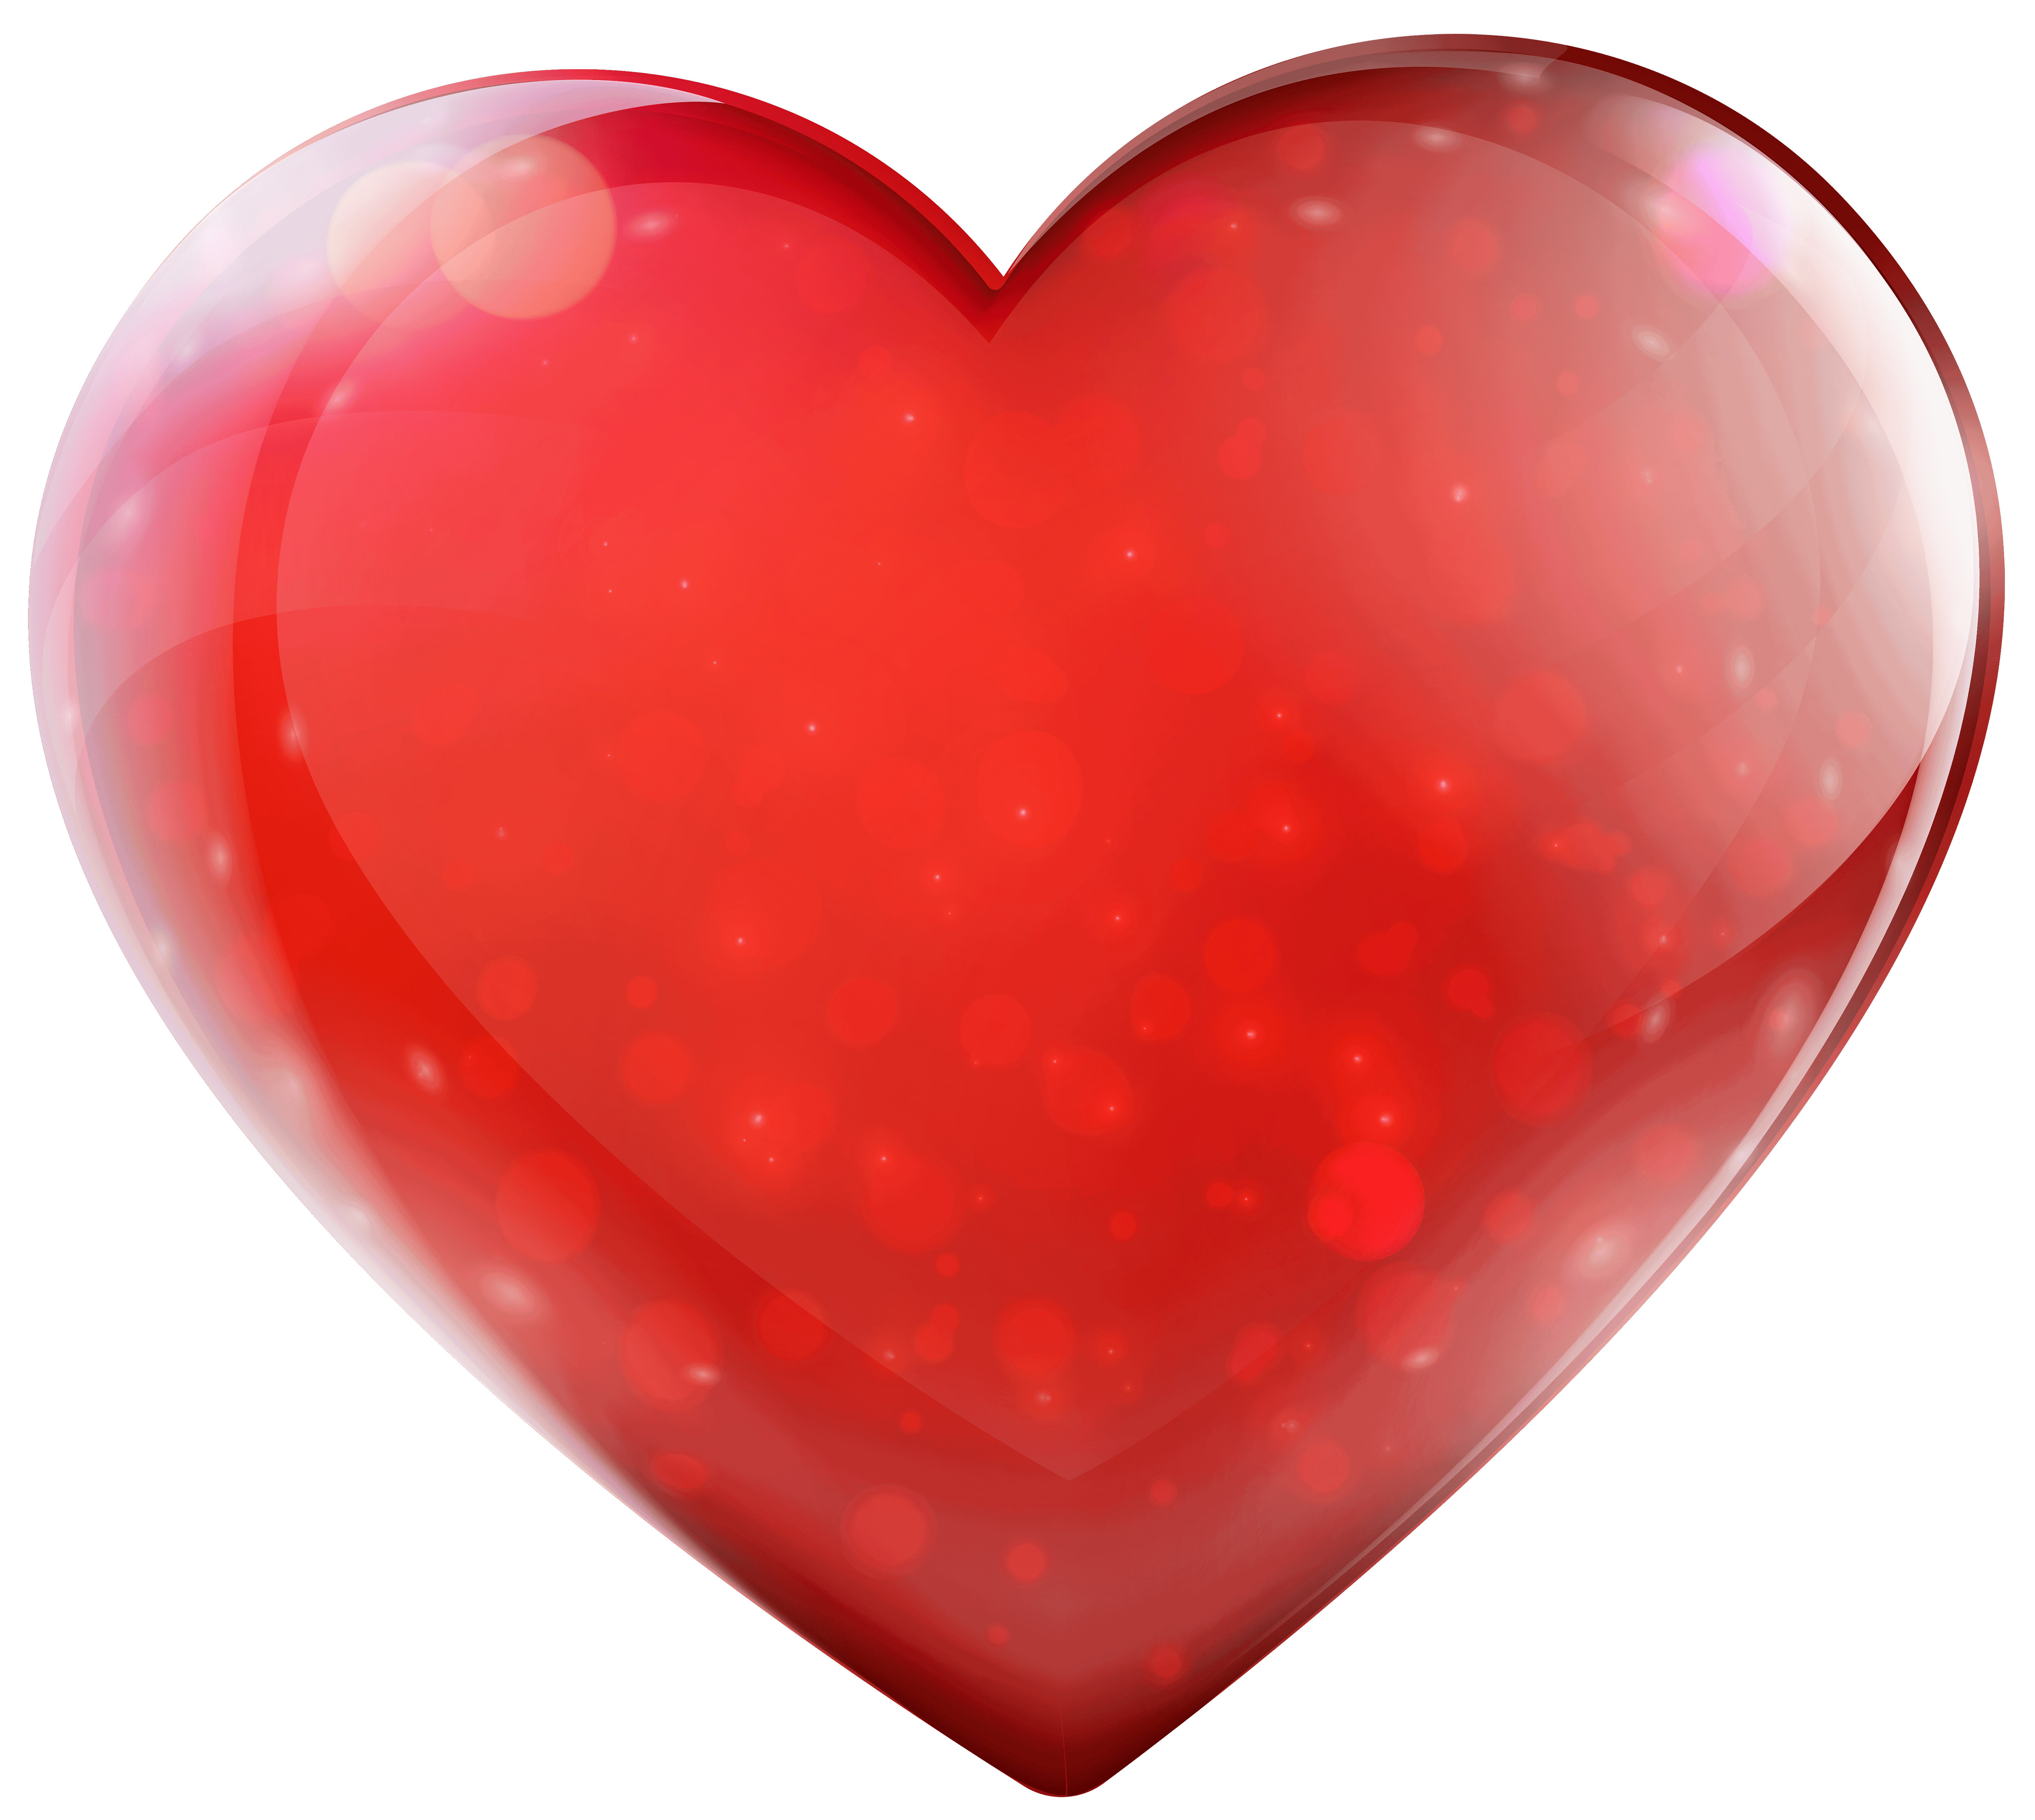 Glassy Heart PNG clipart